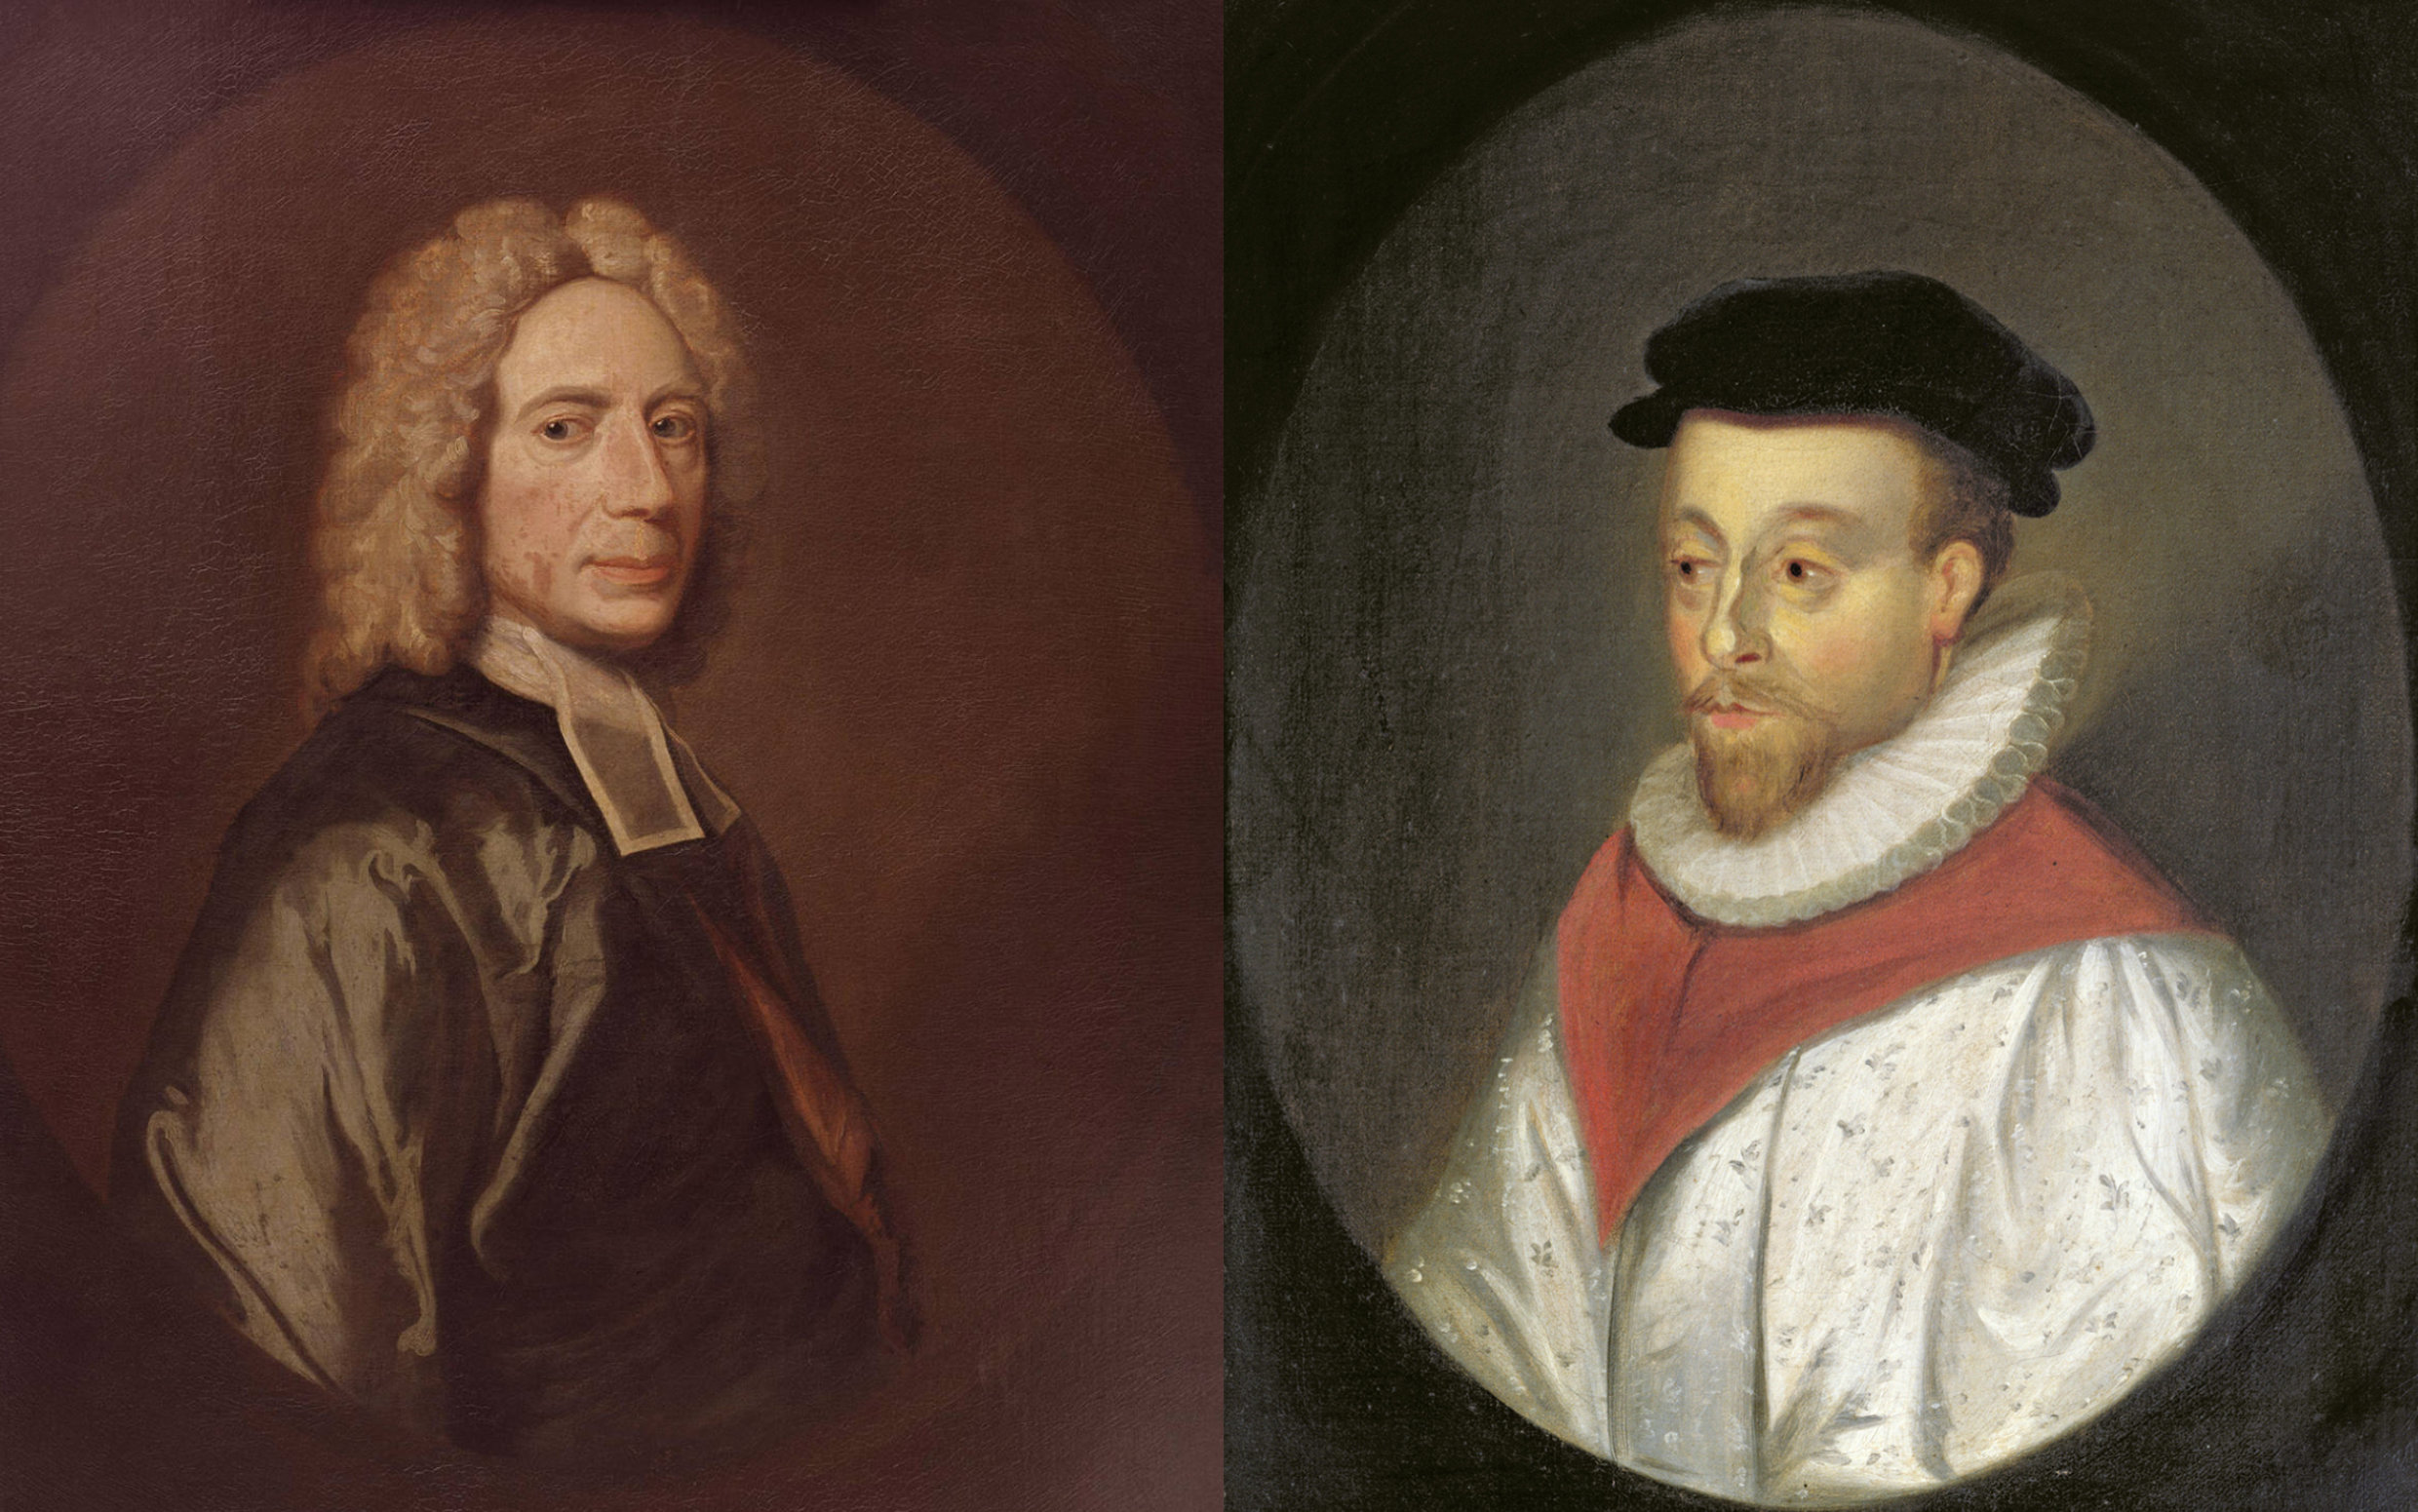 Orlando Gibbons (right) was one of the greatest composers of anthems, fantasias, and madrigals (notably The Silver Swan). A hundred years later the theologian Isaac Watts (left) became one of the greatest writers of hymn texts (When I Survey the Wondrous Cross and some 800 others). Another century on, the poet Robert Bridges brought their work together in the Yattendon Hymnal (1899), when he adapted Watts’ hymn, My Lord, My Life, My Love, for use with Gibbons’ hymn tune, Song 20. Berkeley may first have heard this as a child in church at Boars Hill, Oxford, where the Berkeleys and the Bridges were neighbours. TS